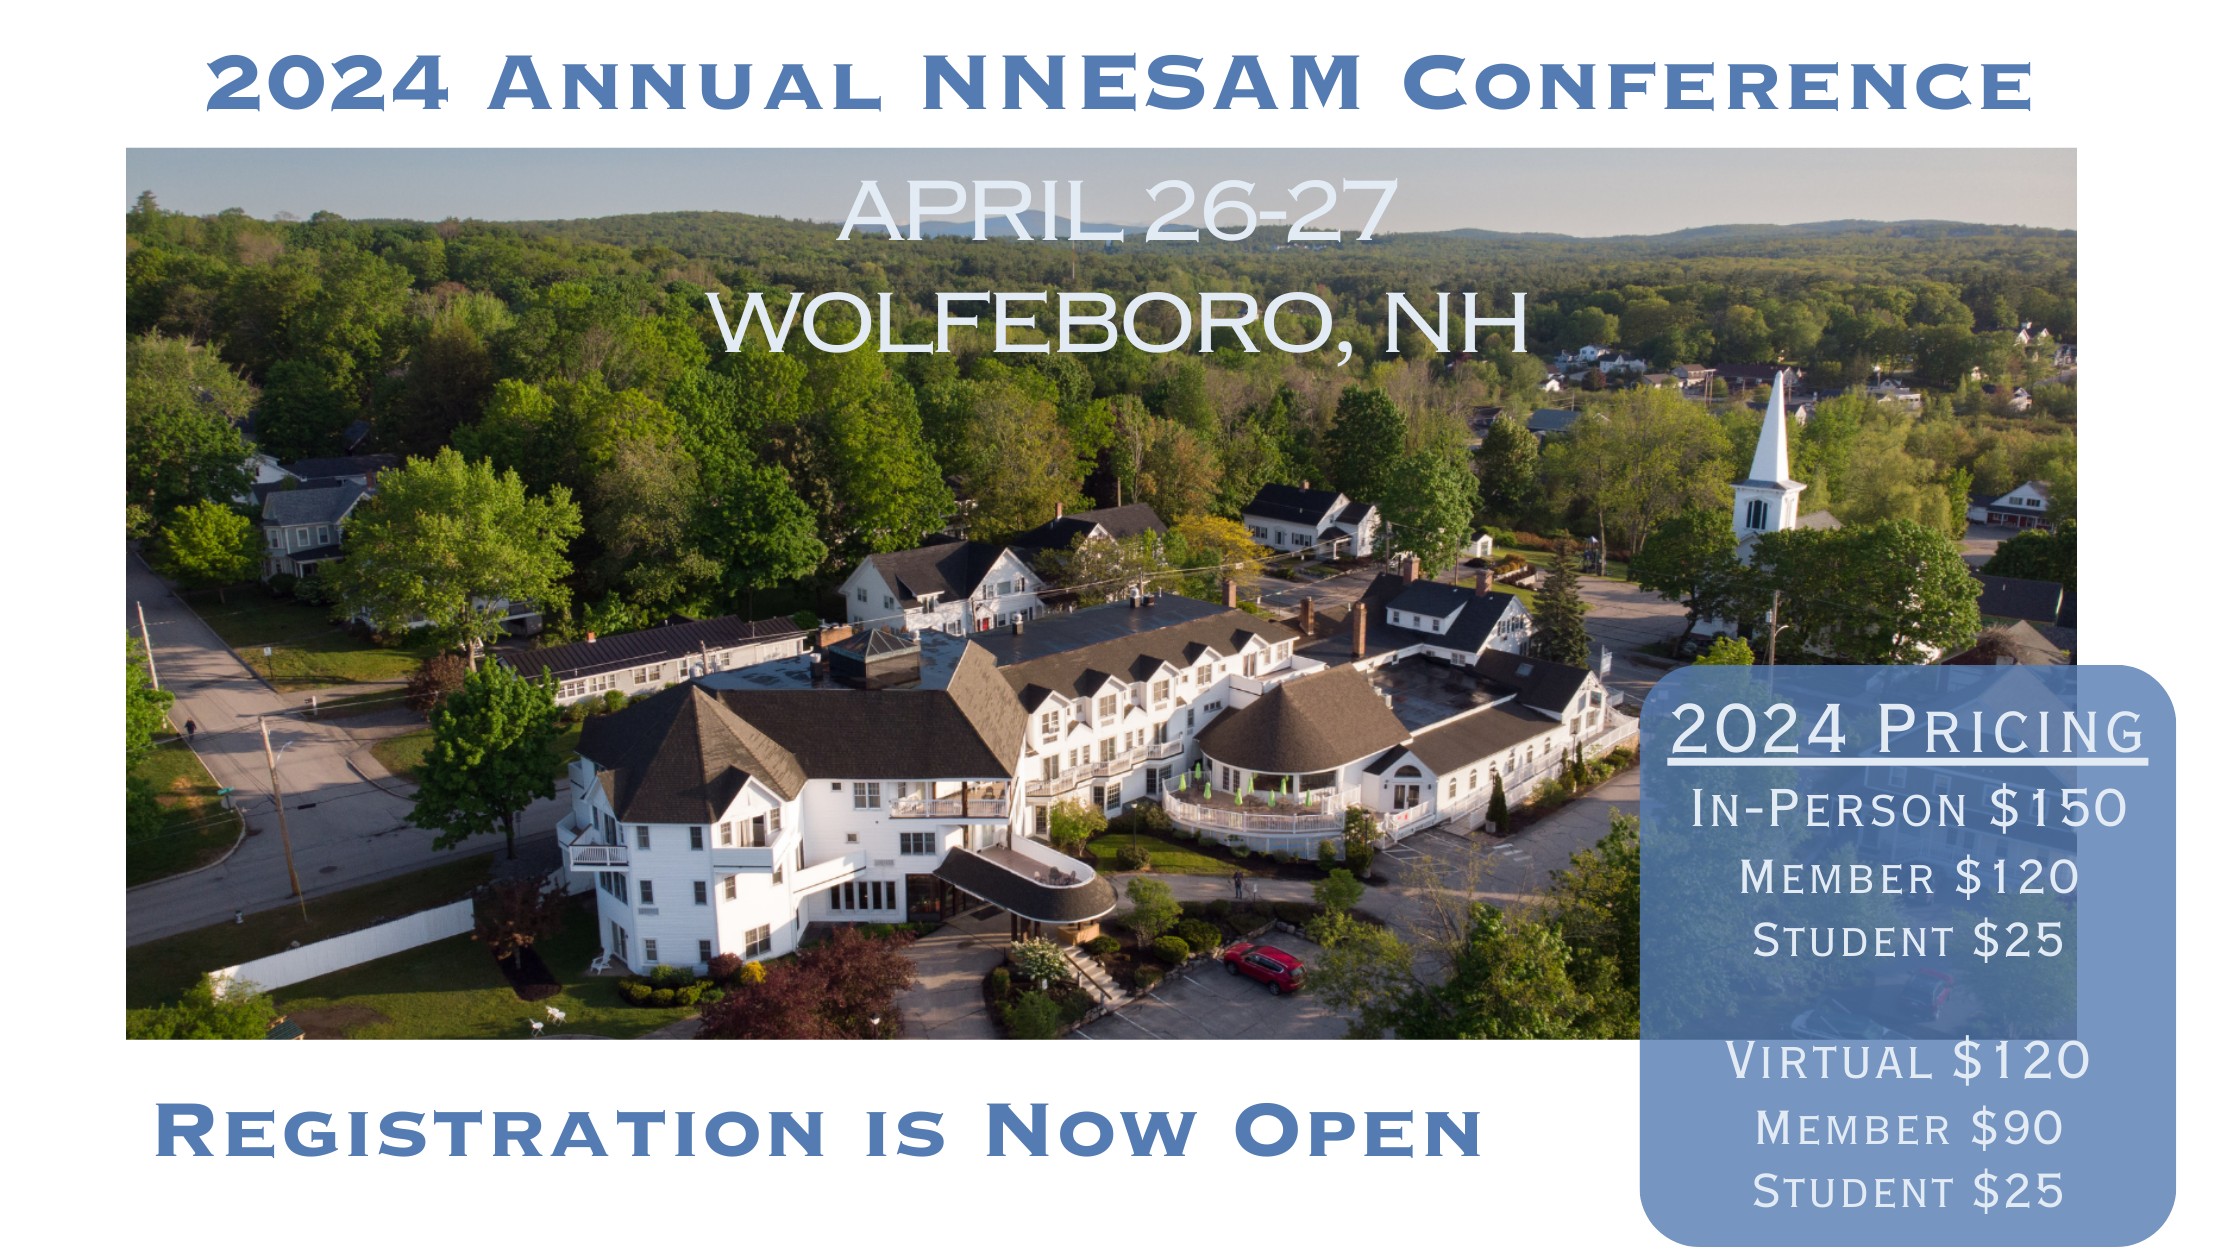 2024 Annual NNESAM Conference - April 26-27 Wolfeboro, NH Registration is now open - 2024 Pricing: in-person $150, member $120, student, $25 Virtual $120, virtual member $90, virtual student $25